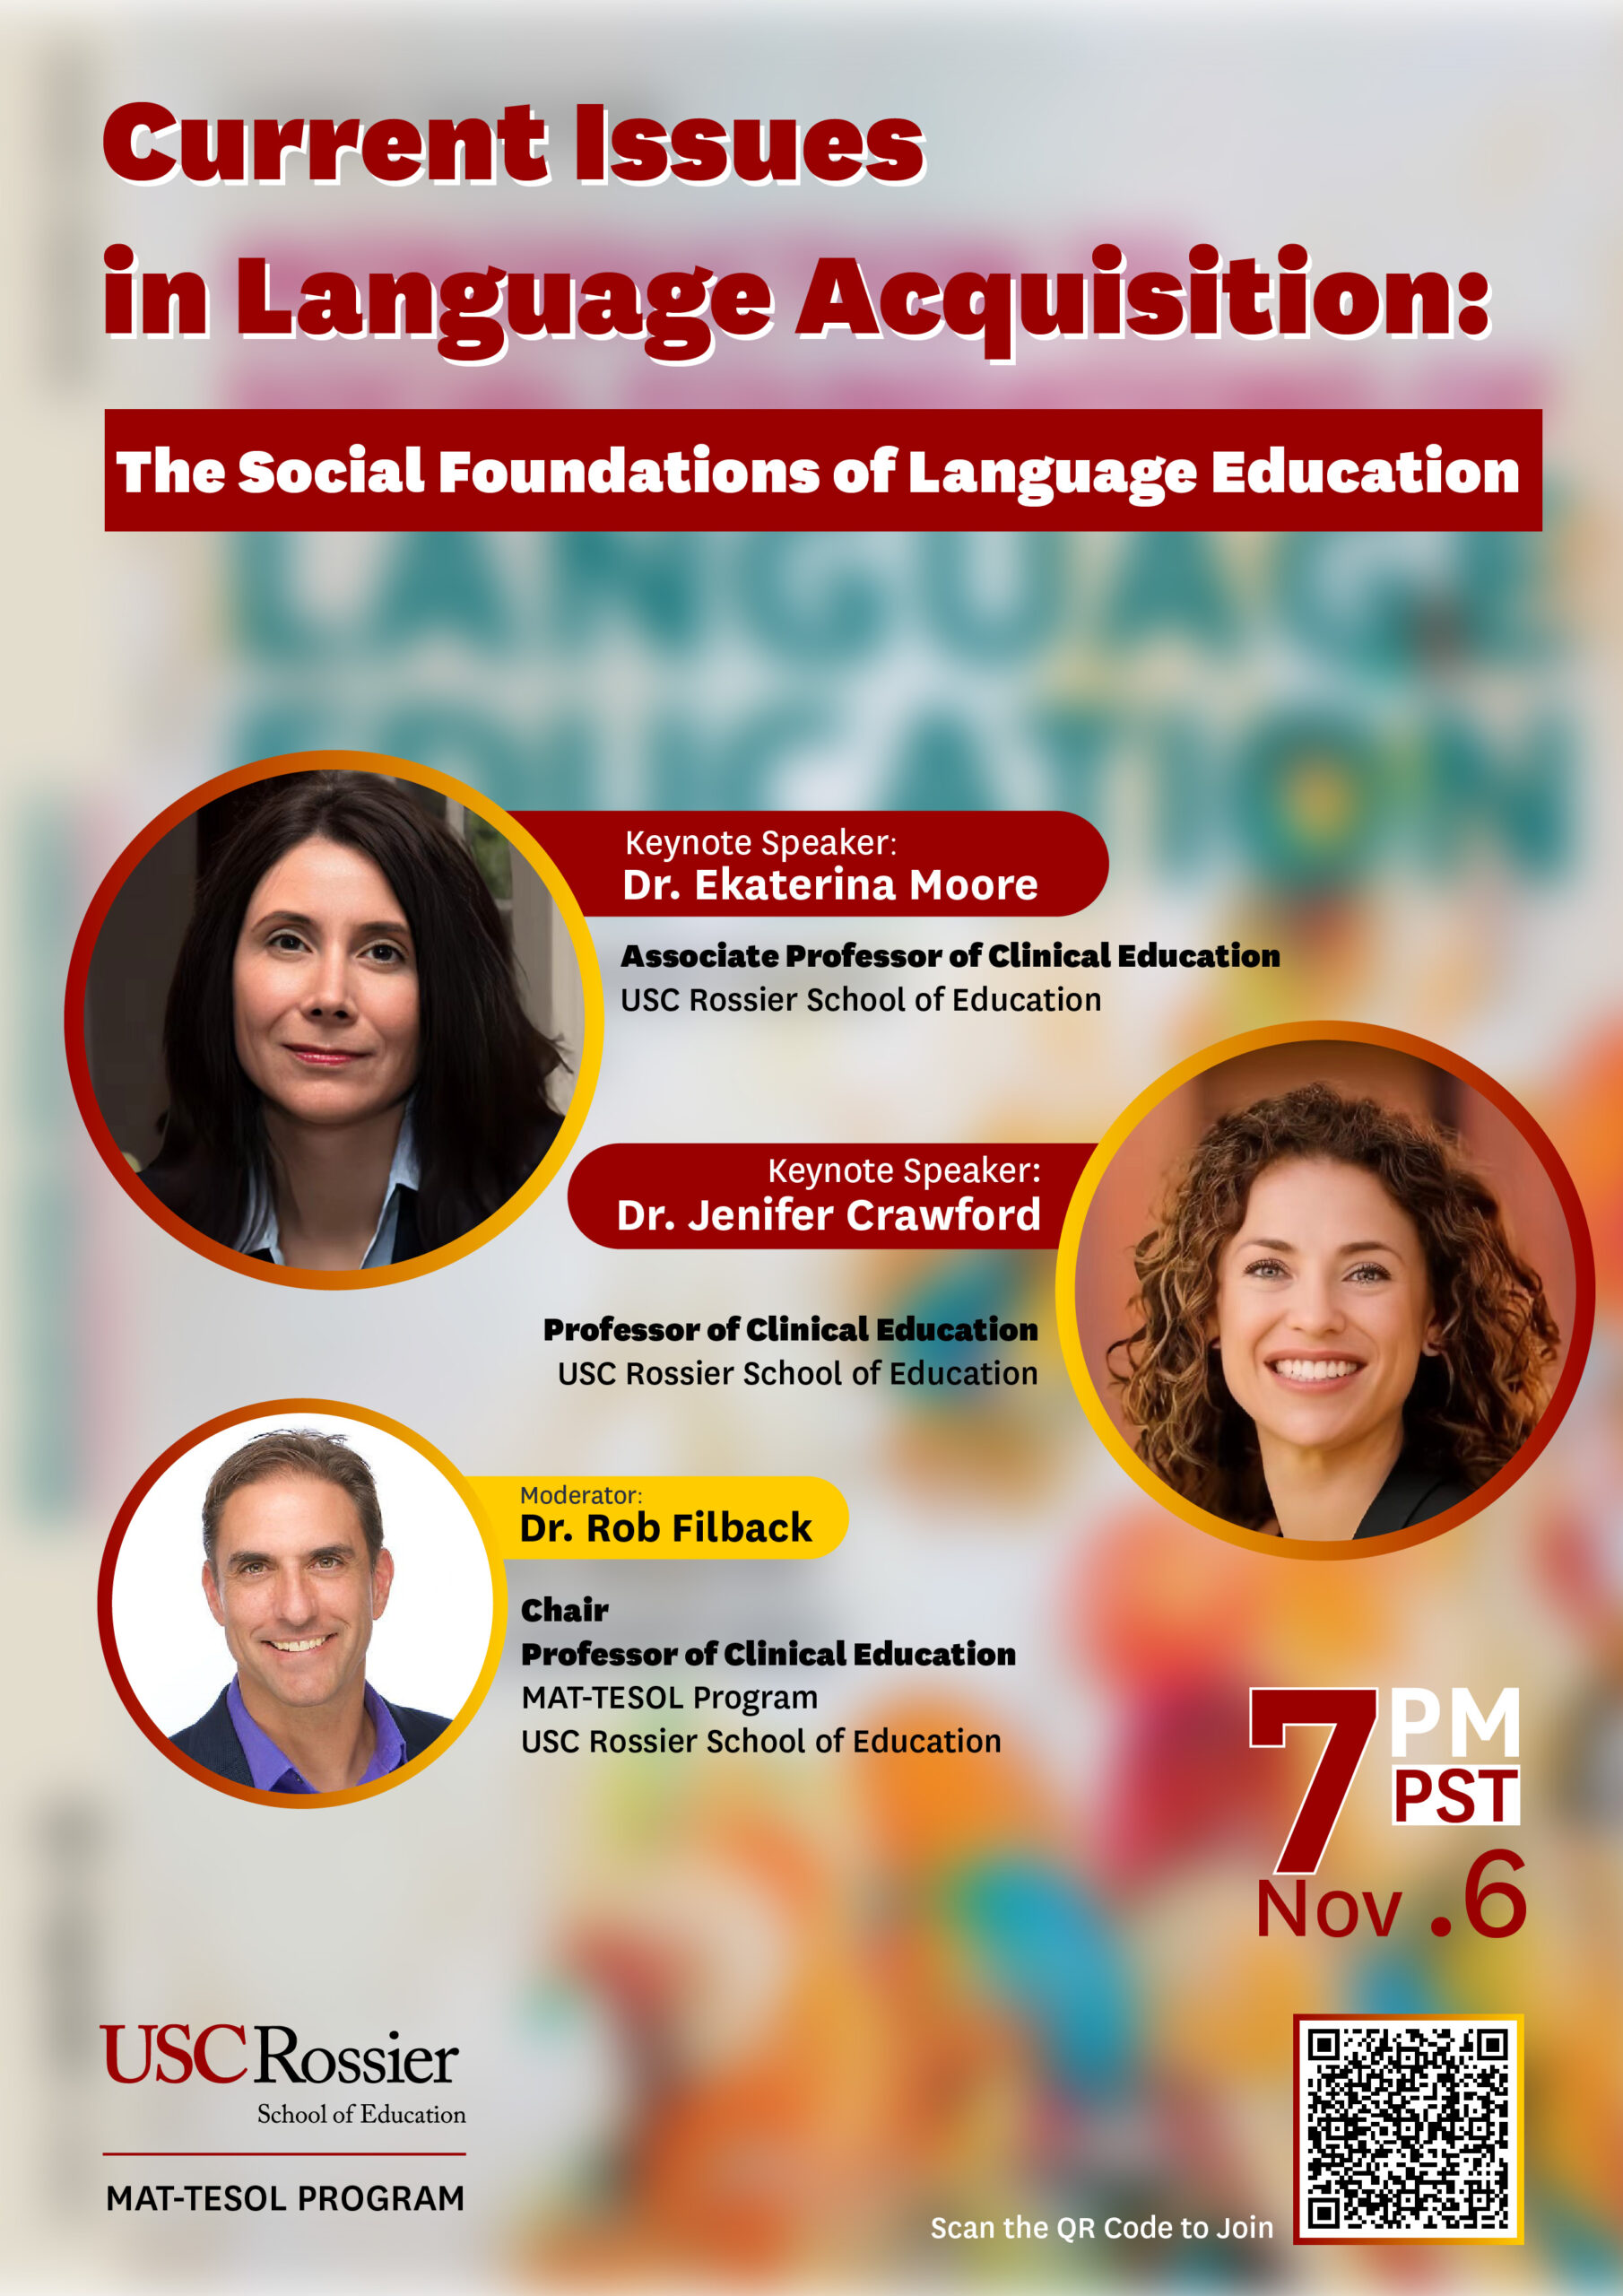 Current Issues in Language Acquisition: The Social Foundations of Language Education